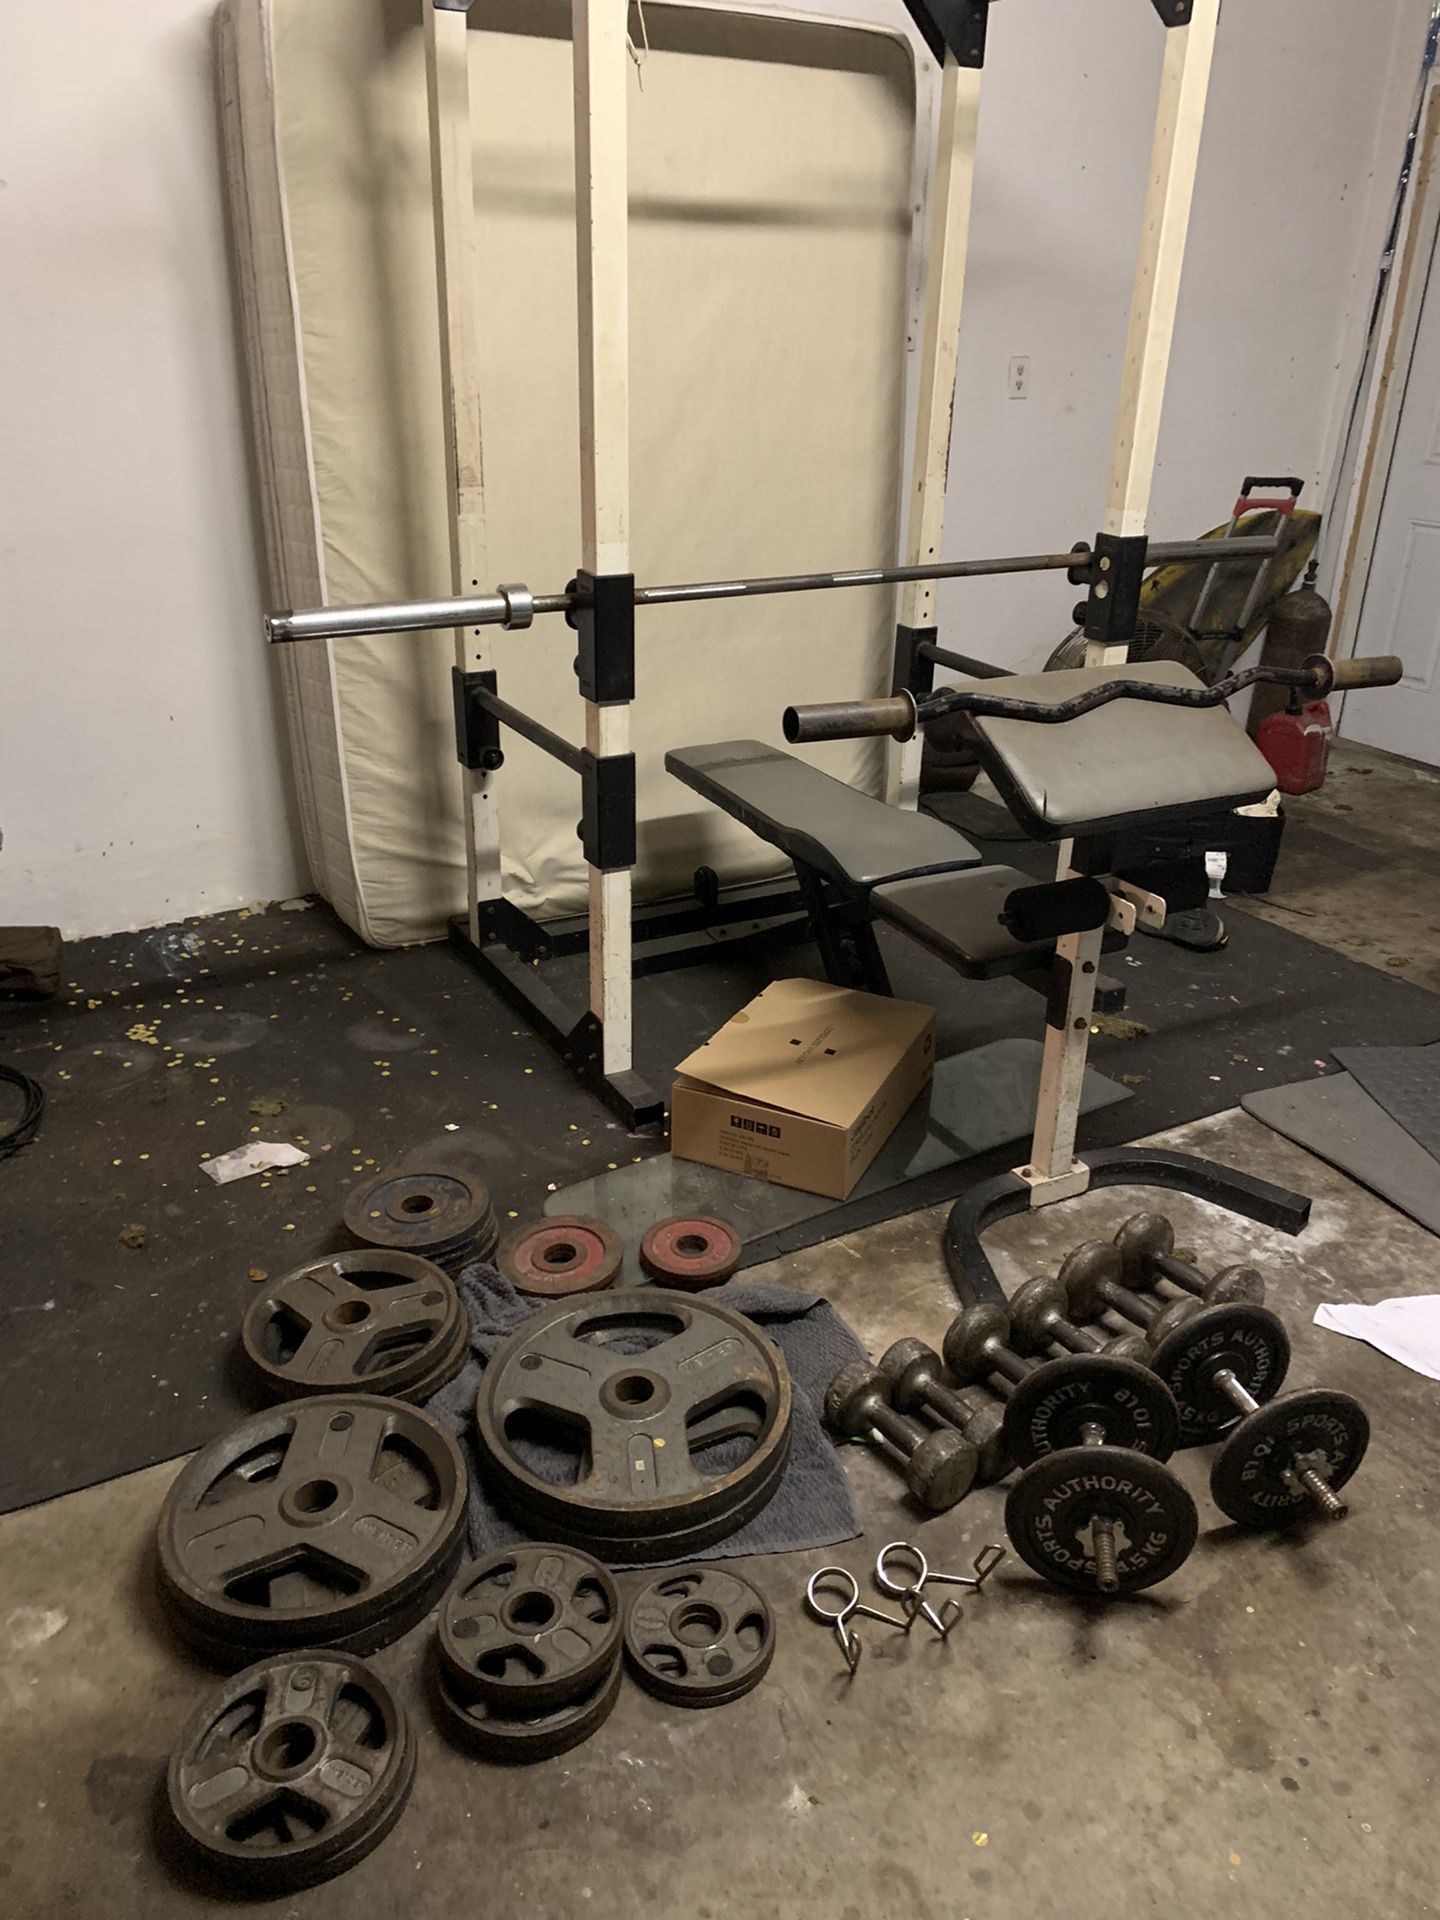 Club/weider 585 squat/bench rack and weights